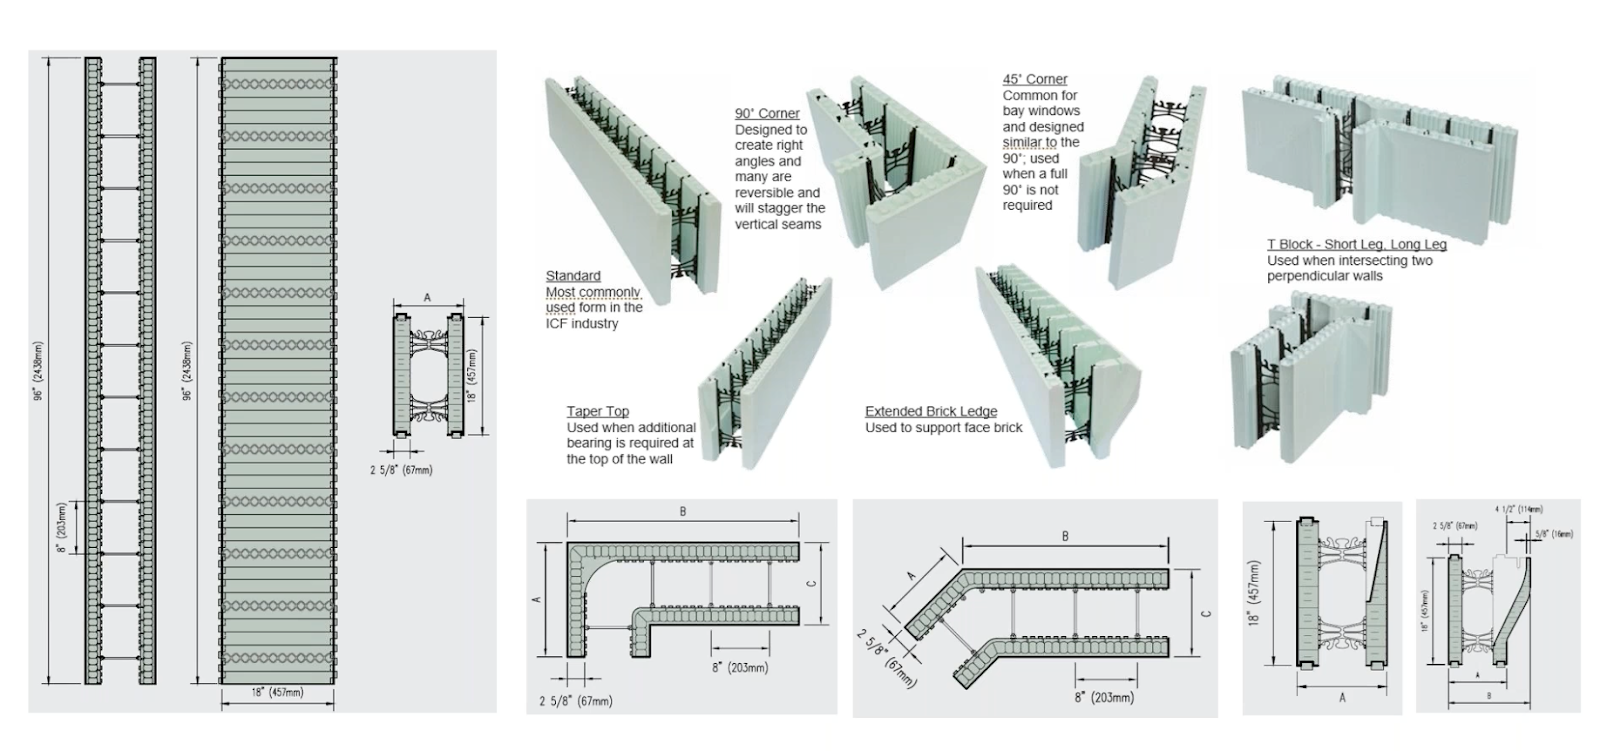 A diagram of ICF products including a Taper Top, Extended Brick Ledge, and Standard panel used to draft building structures.